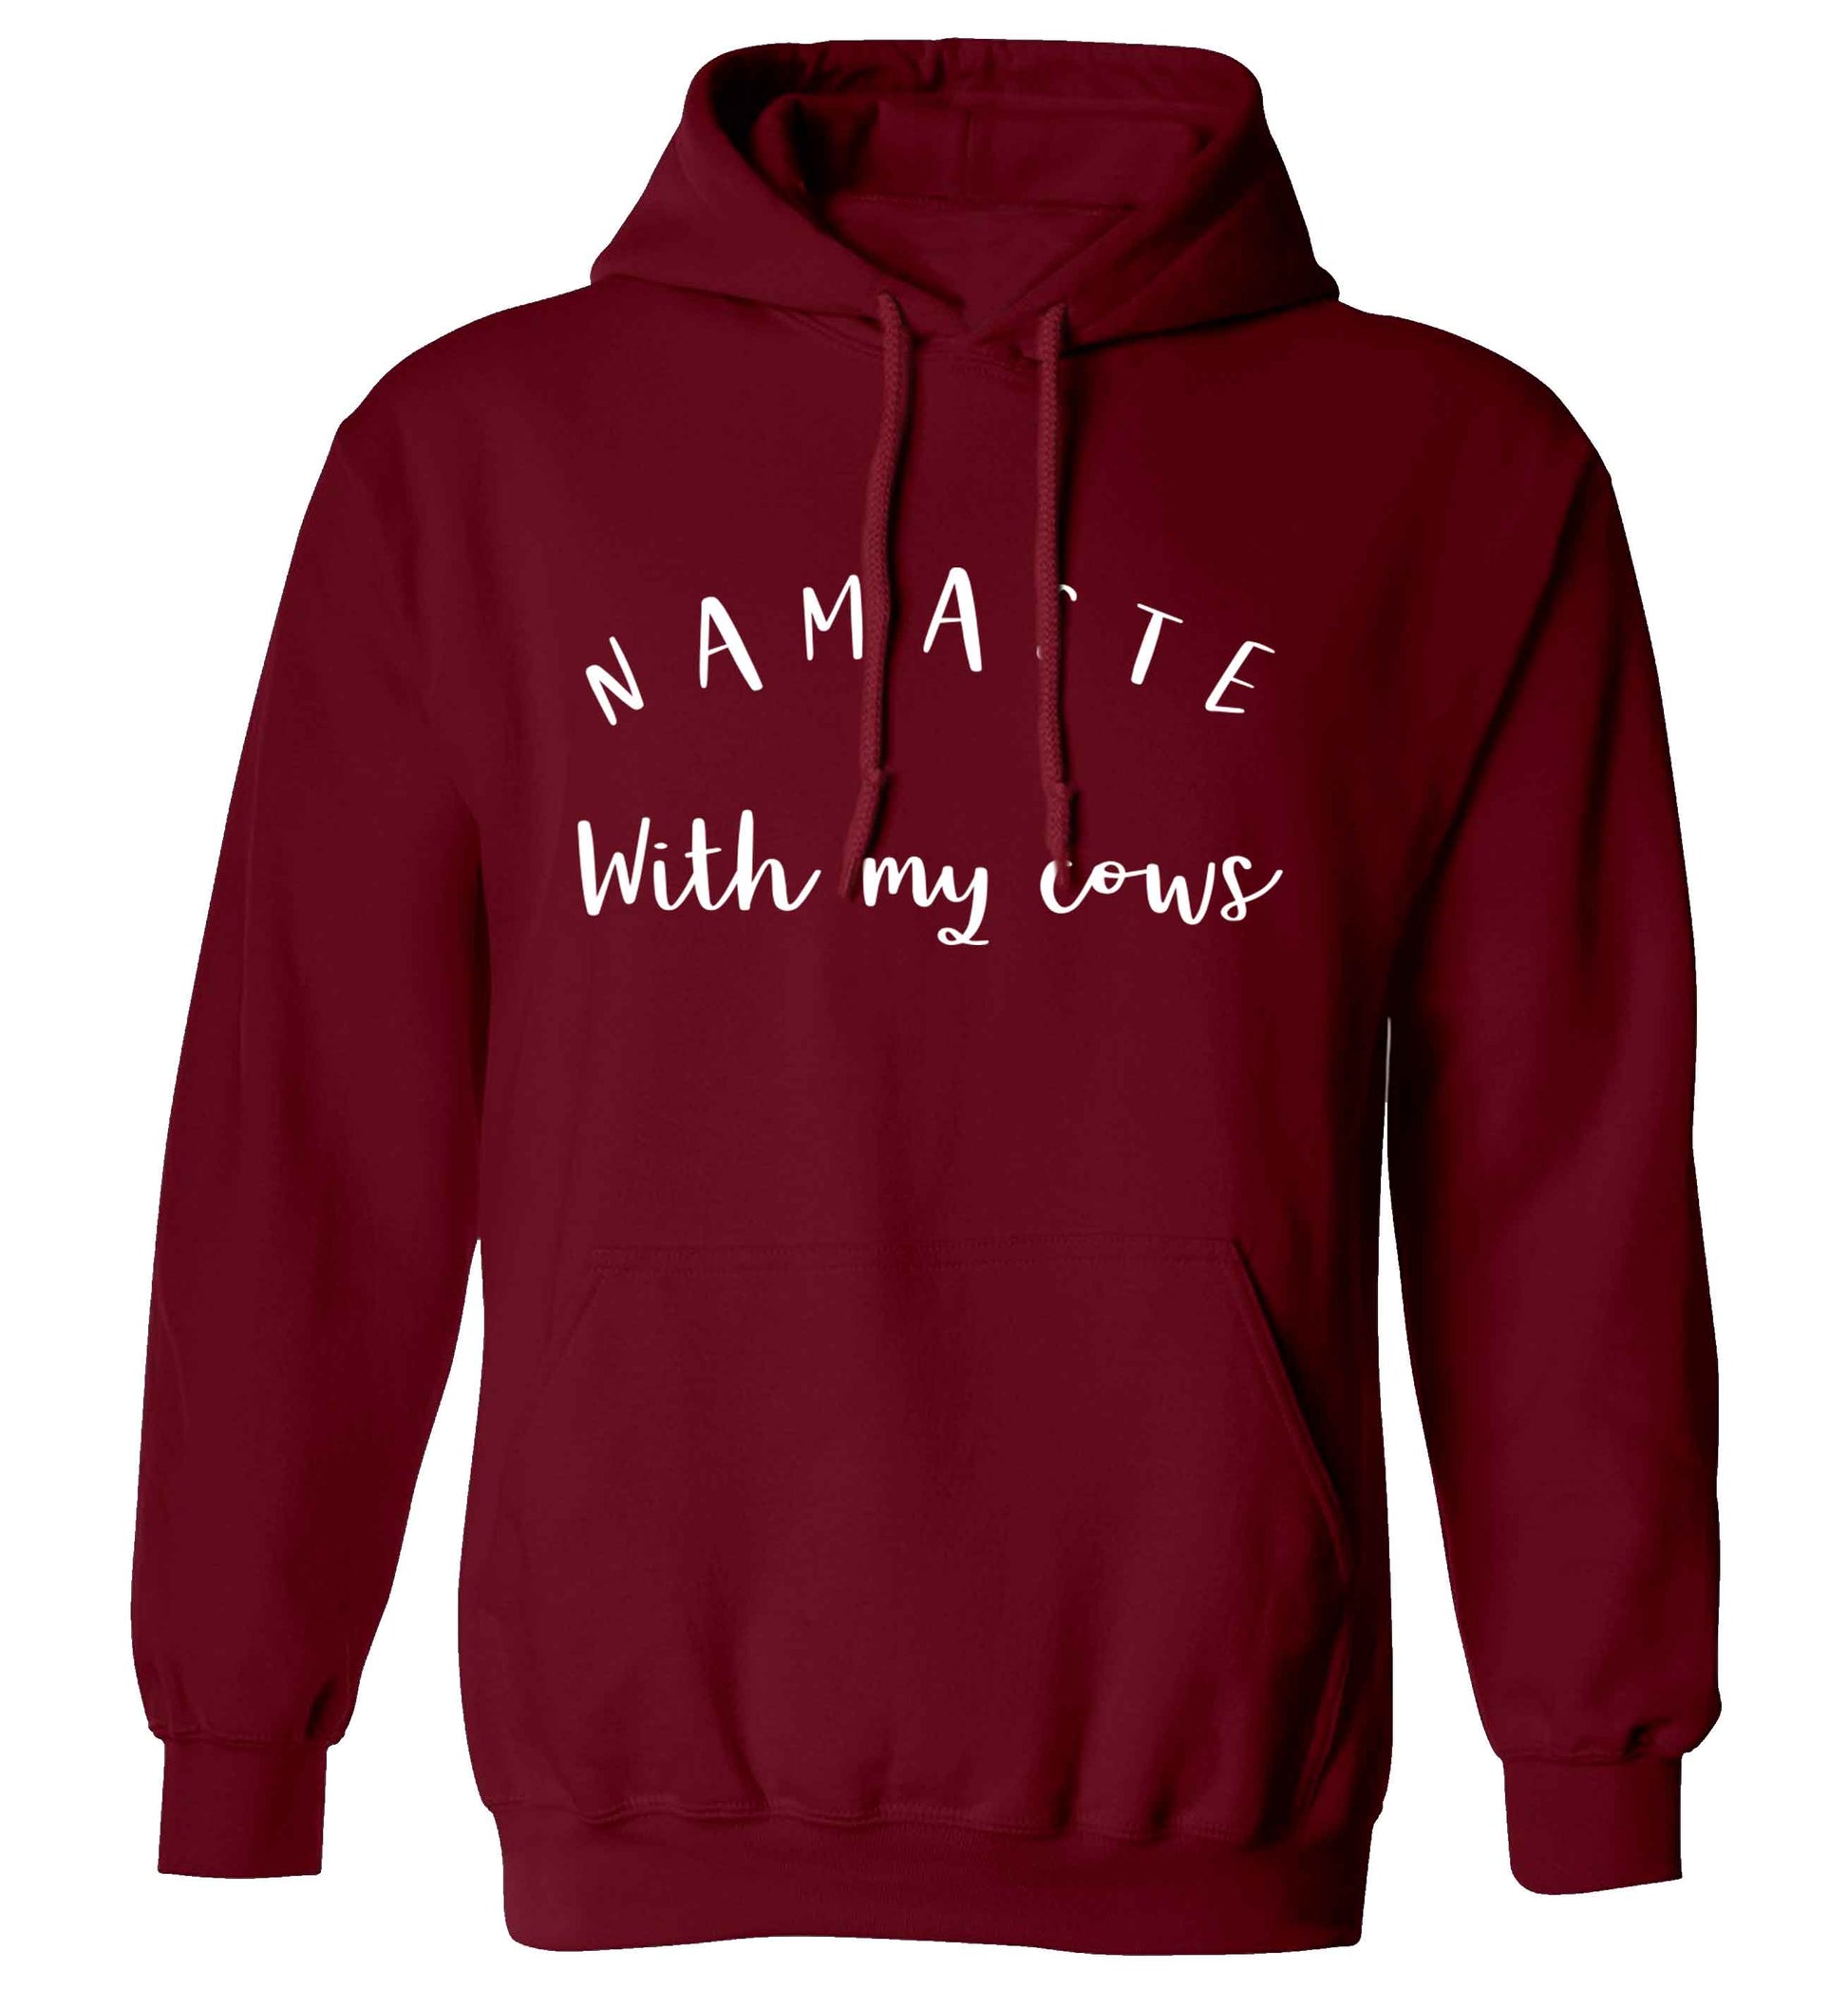 Namaste with my cows adults unisex maroon hoodie 2XL